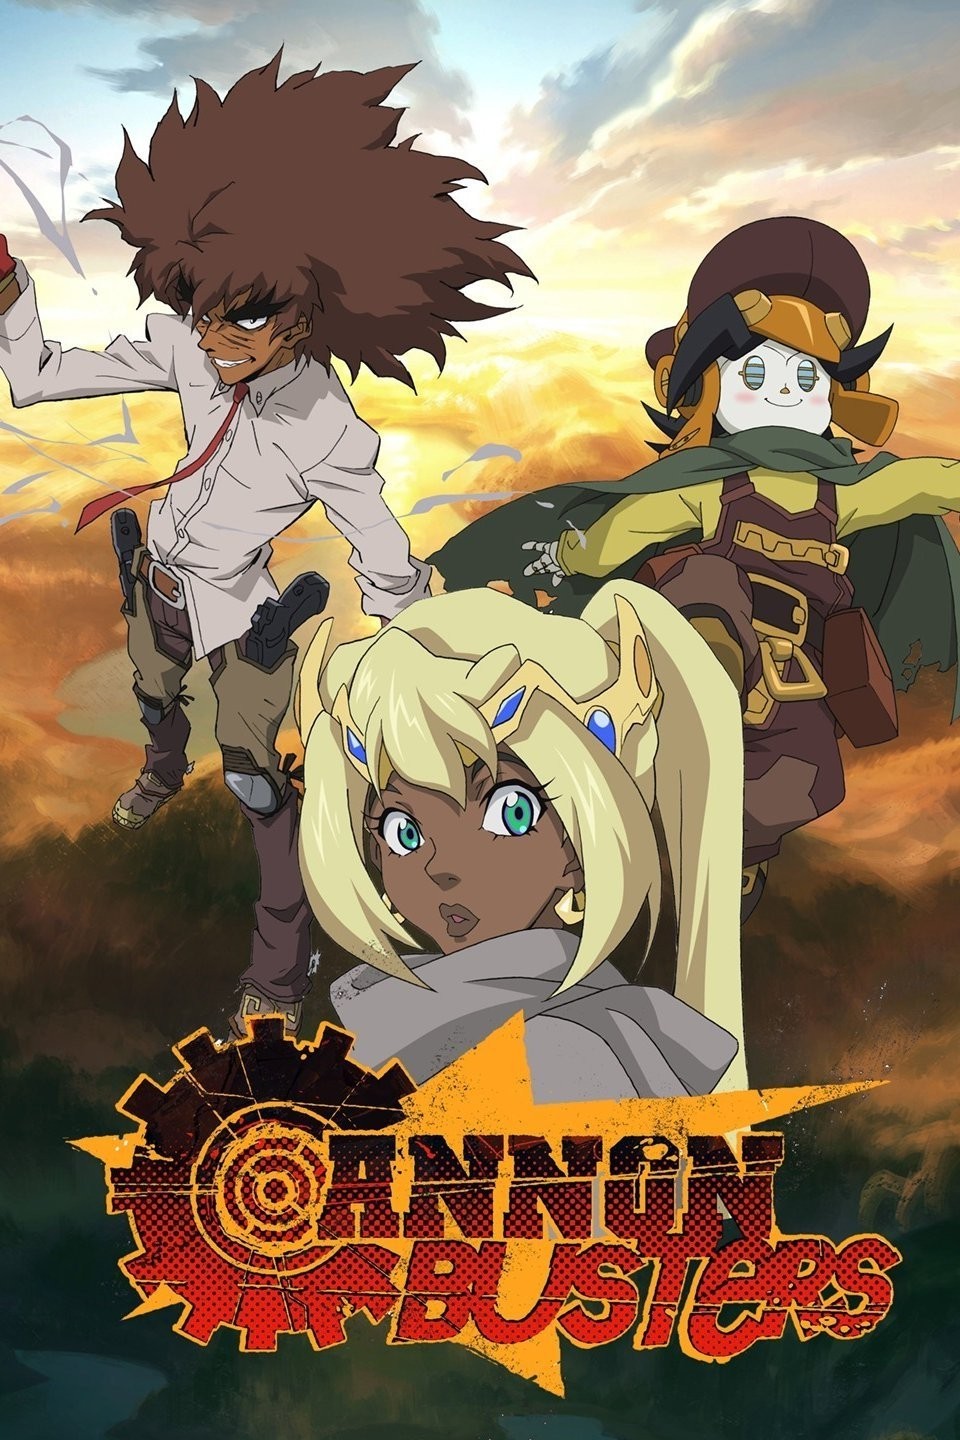 Cannon Busters - The Complete Series [Blu-ray]: Amazon.co.uk: DVD & Blu-ray